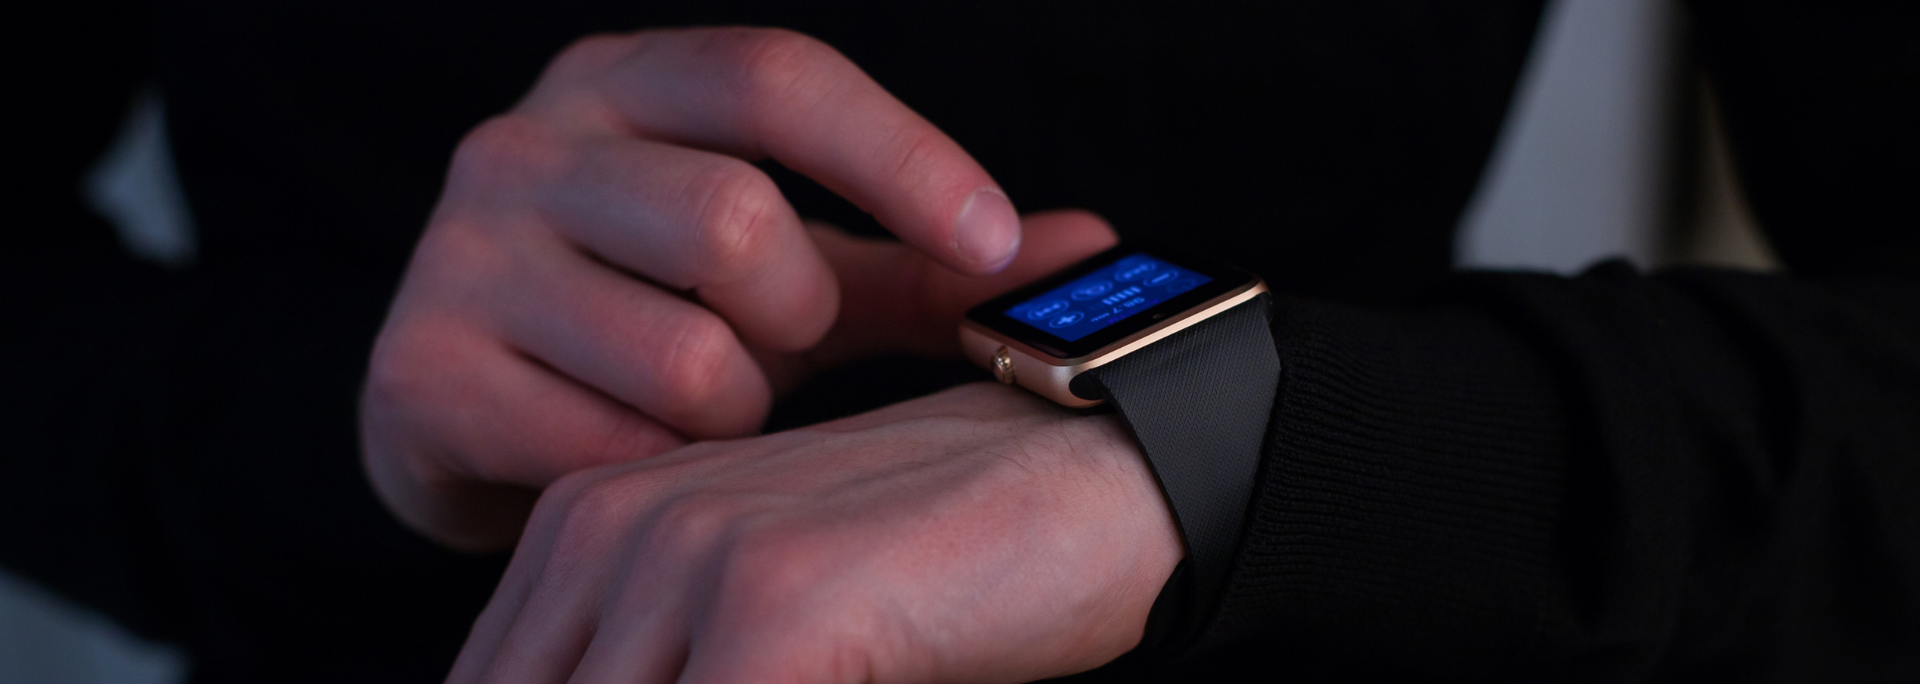 Picture of a smart watch